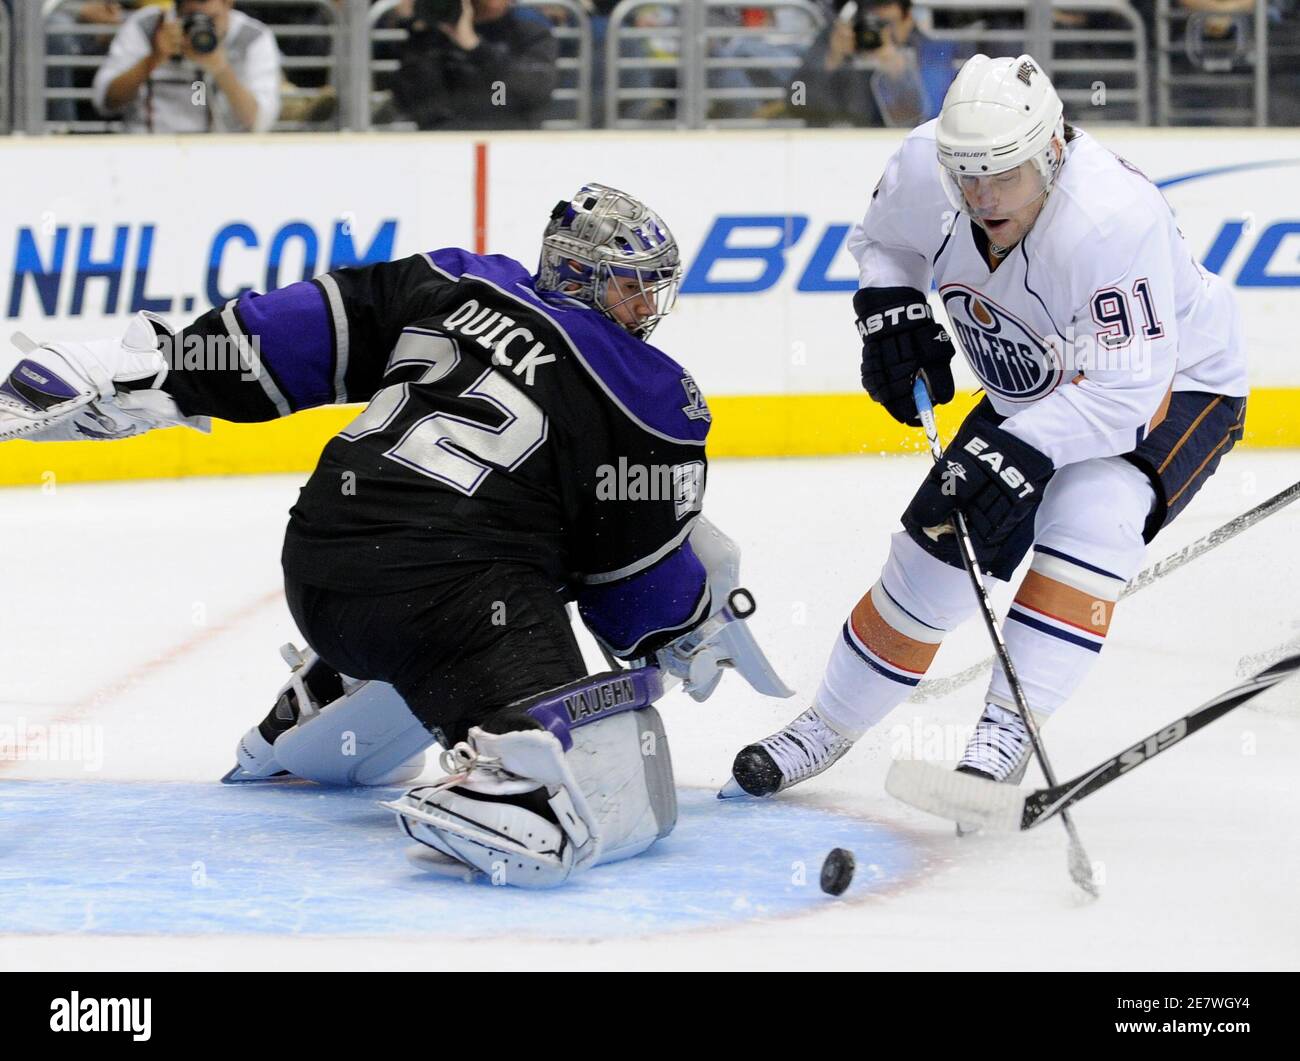 Edmonton Oilers center Mike Comrie (R) gets the puck past Los Angeles Kings goaltender Jonathan Quick to score during the first period of their NHL hockey game in Los Angeles, California, April 10, 2010. The Oilers won the game. REUTERS/Gus Ruelas (UNITED STATES - Tags: SPORT ICE HOCKEY) Stock Photo